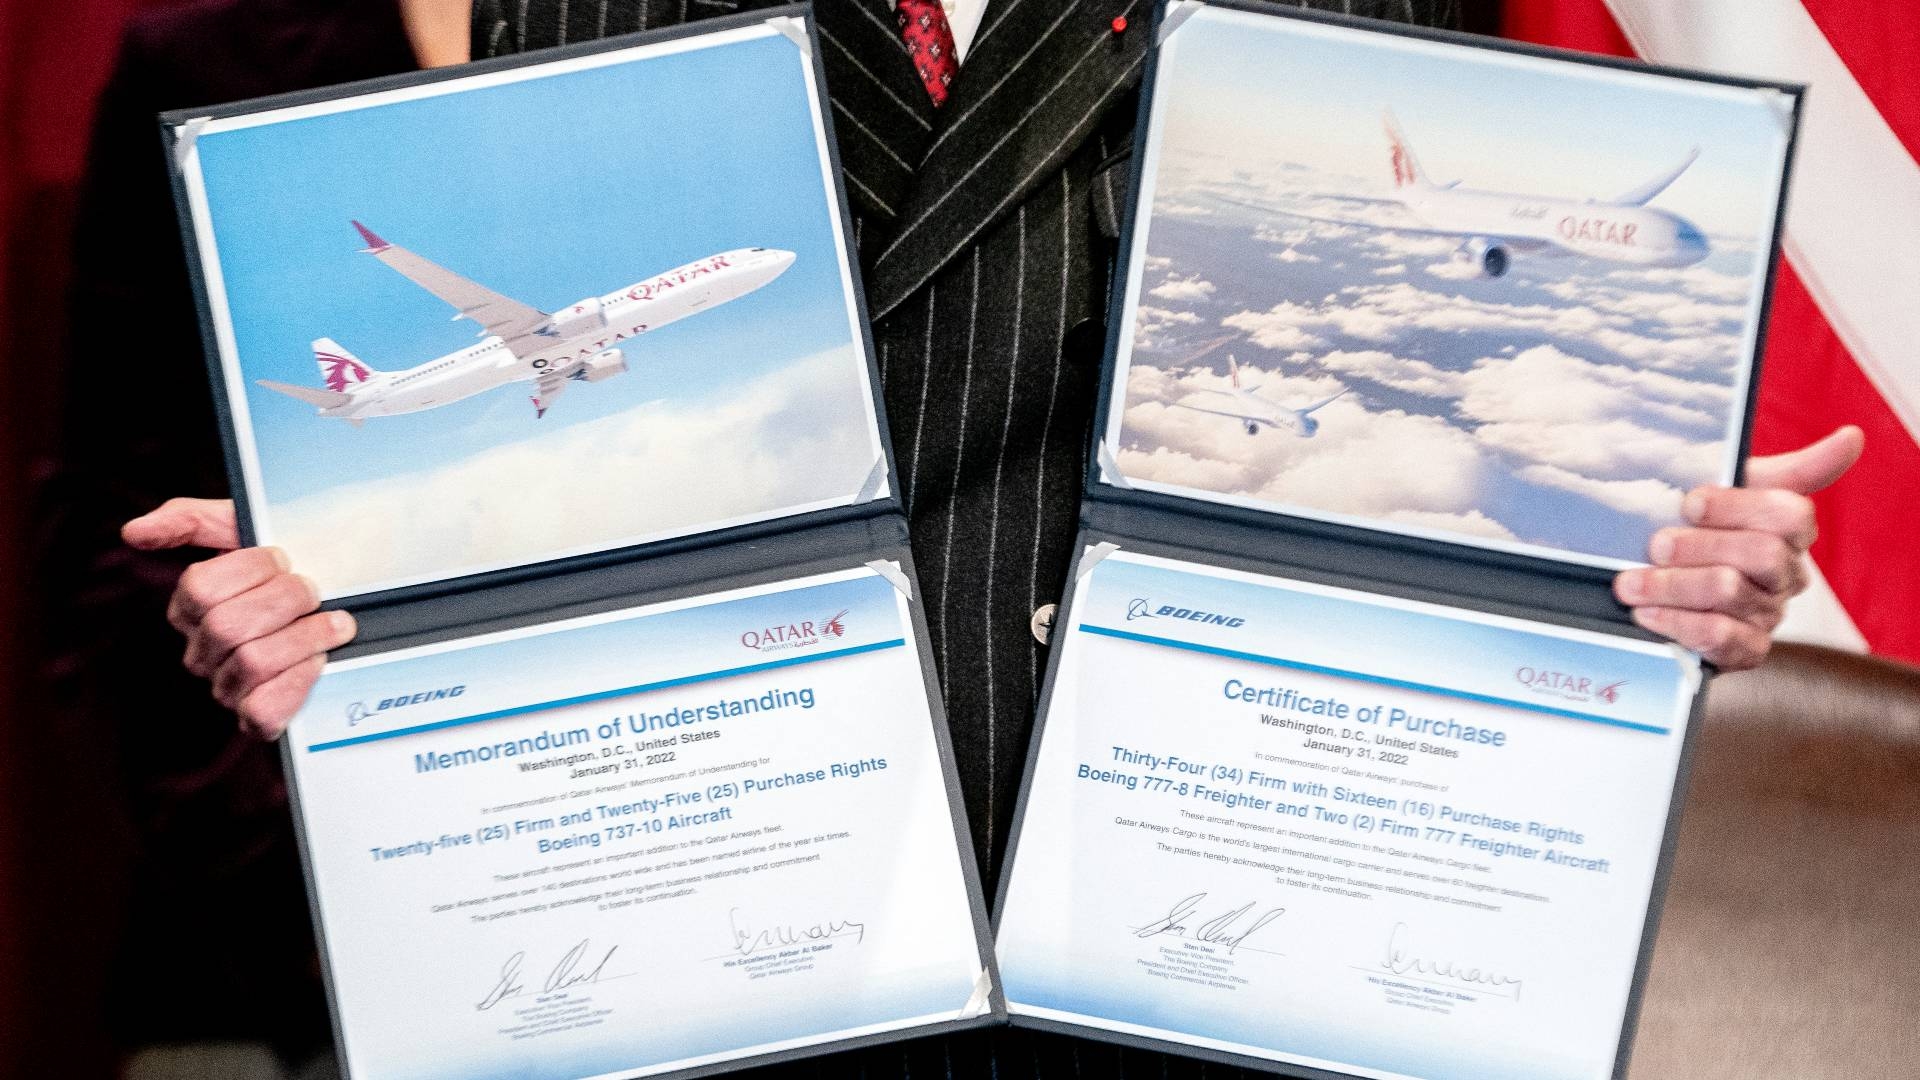 Akbar Al Baker, Qatar Airways CEO, displays certificates following a signing ceremony with Boeing in Washington on 31 January 2022.